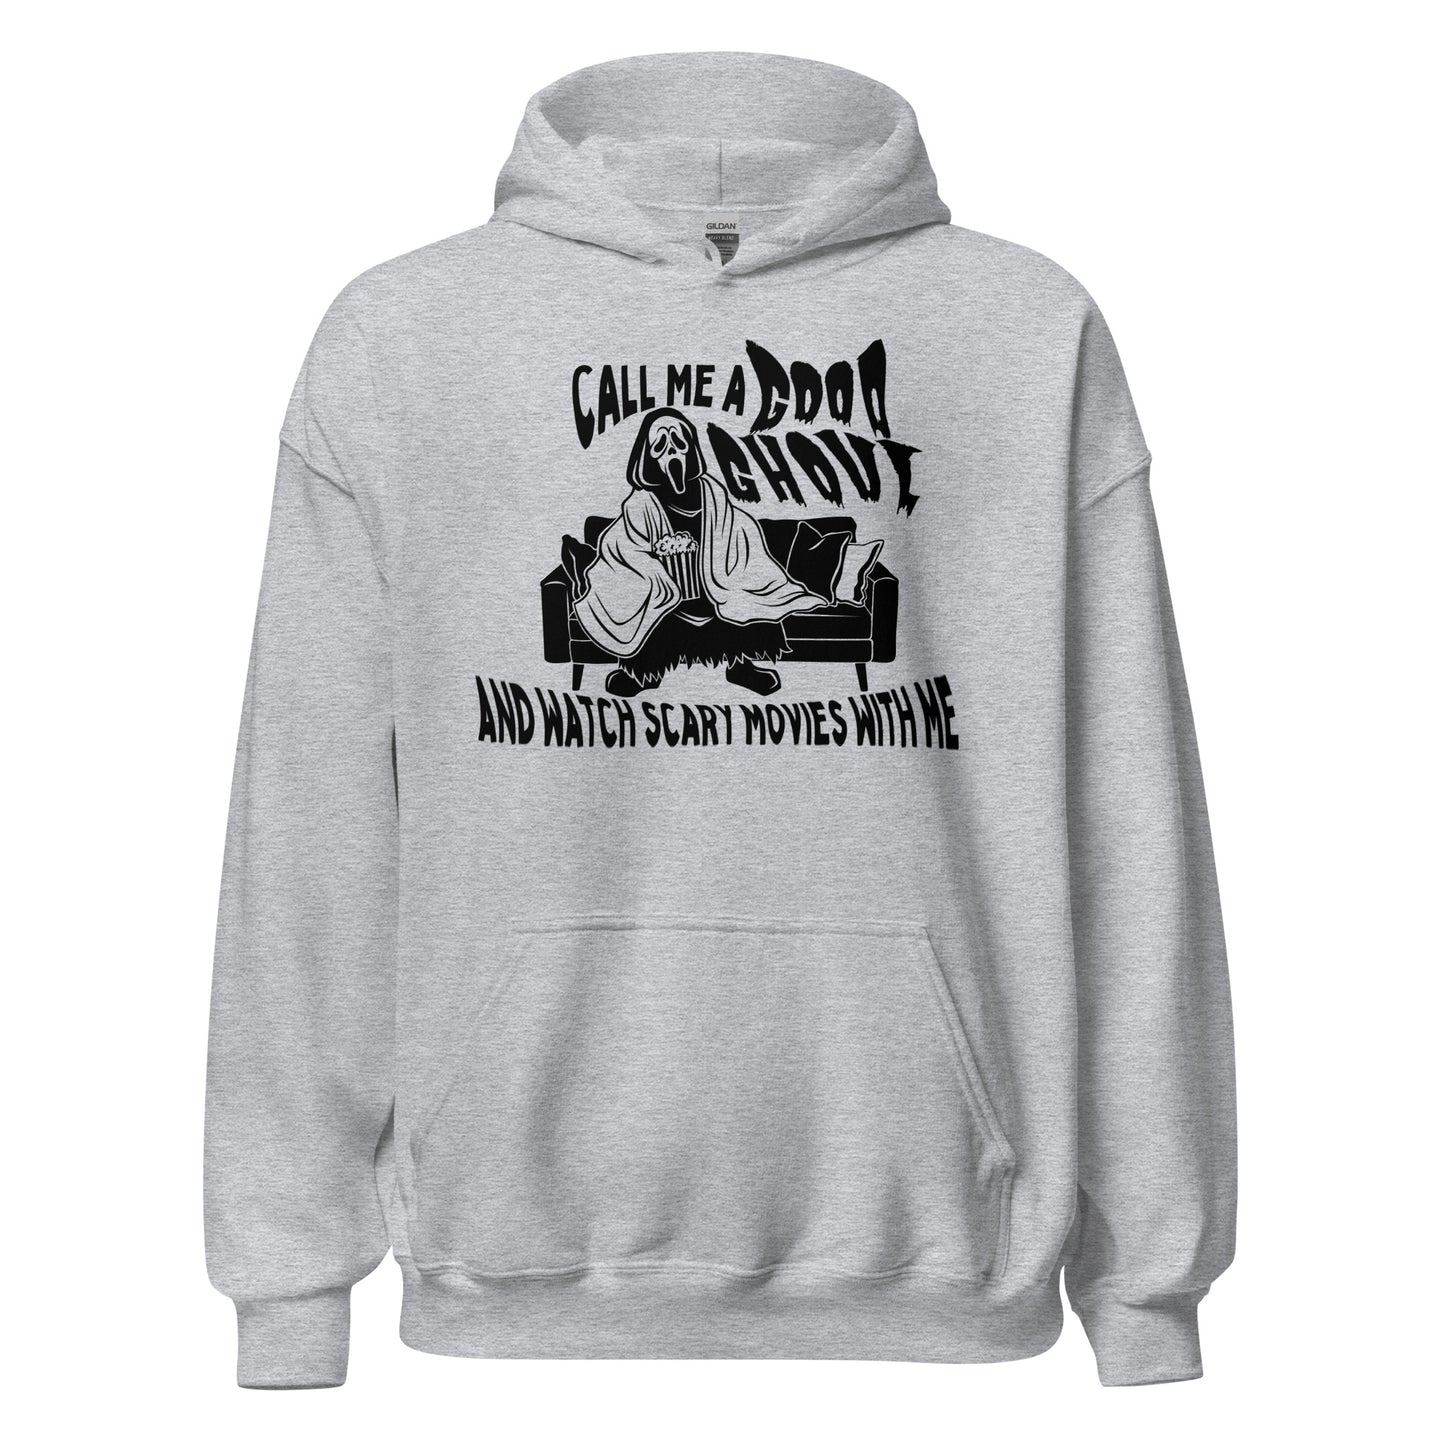 call me a good ghoul and watch scary movies with me hoodie (black)